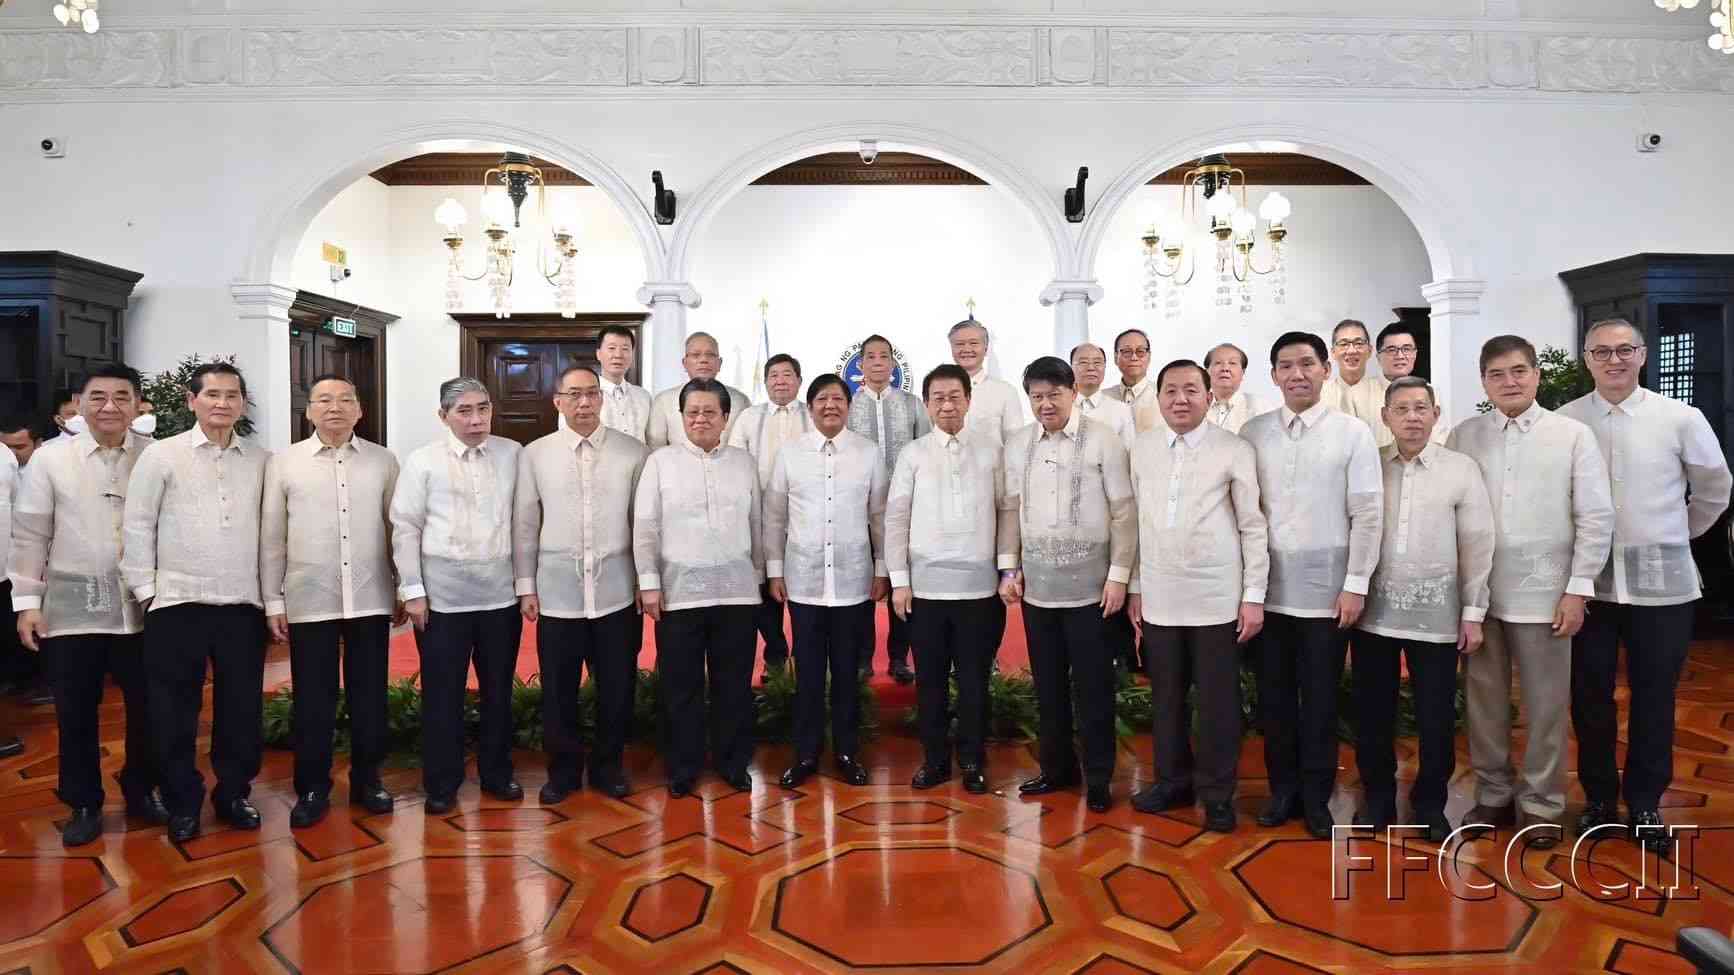 PH-Chinese business group calls for “mutual respect” amidst rising tensions in West PH Sea